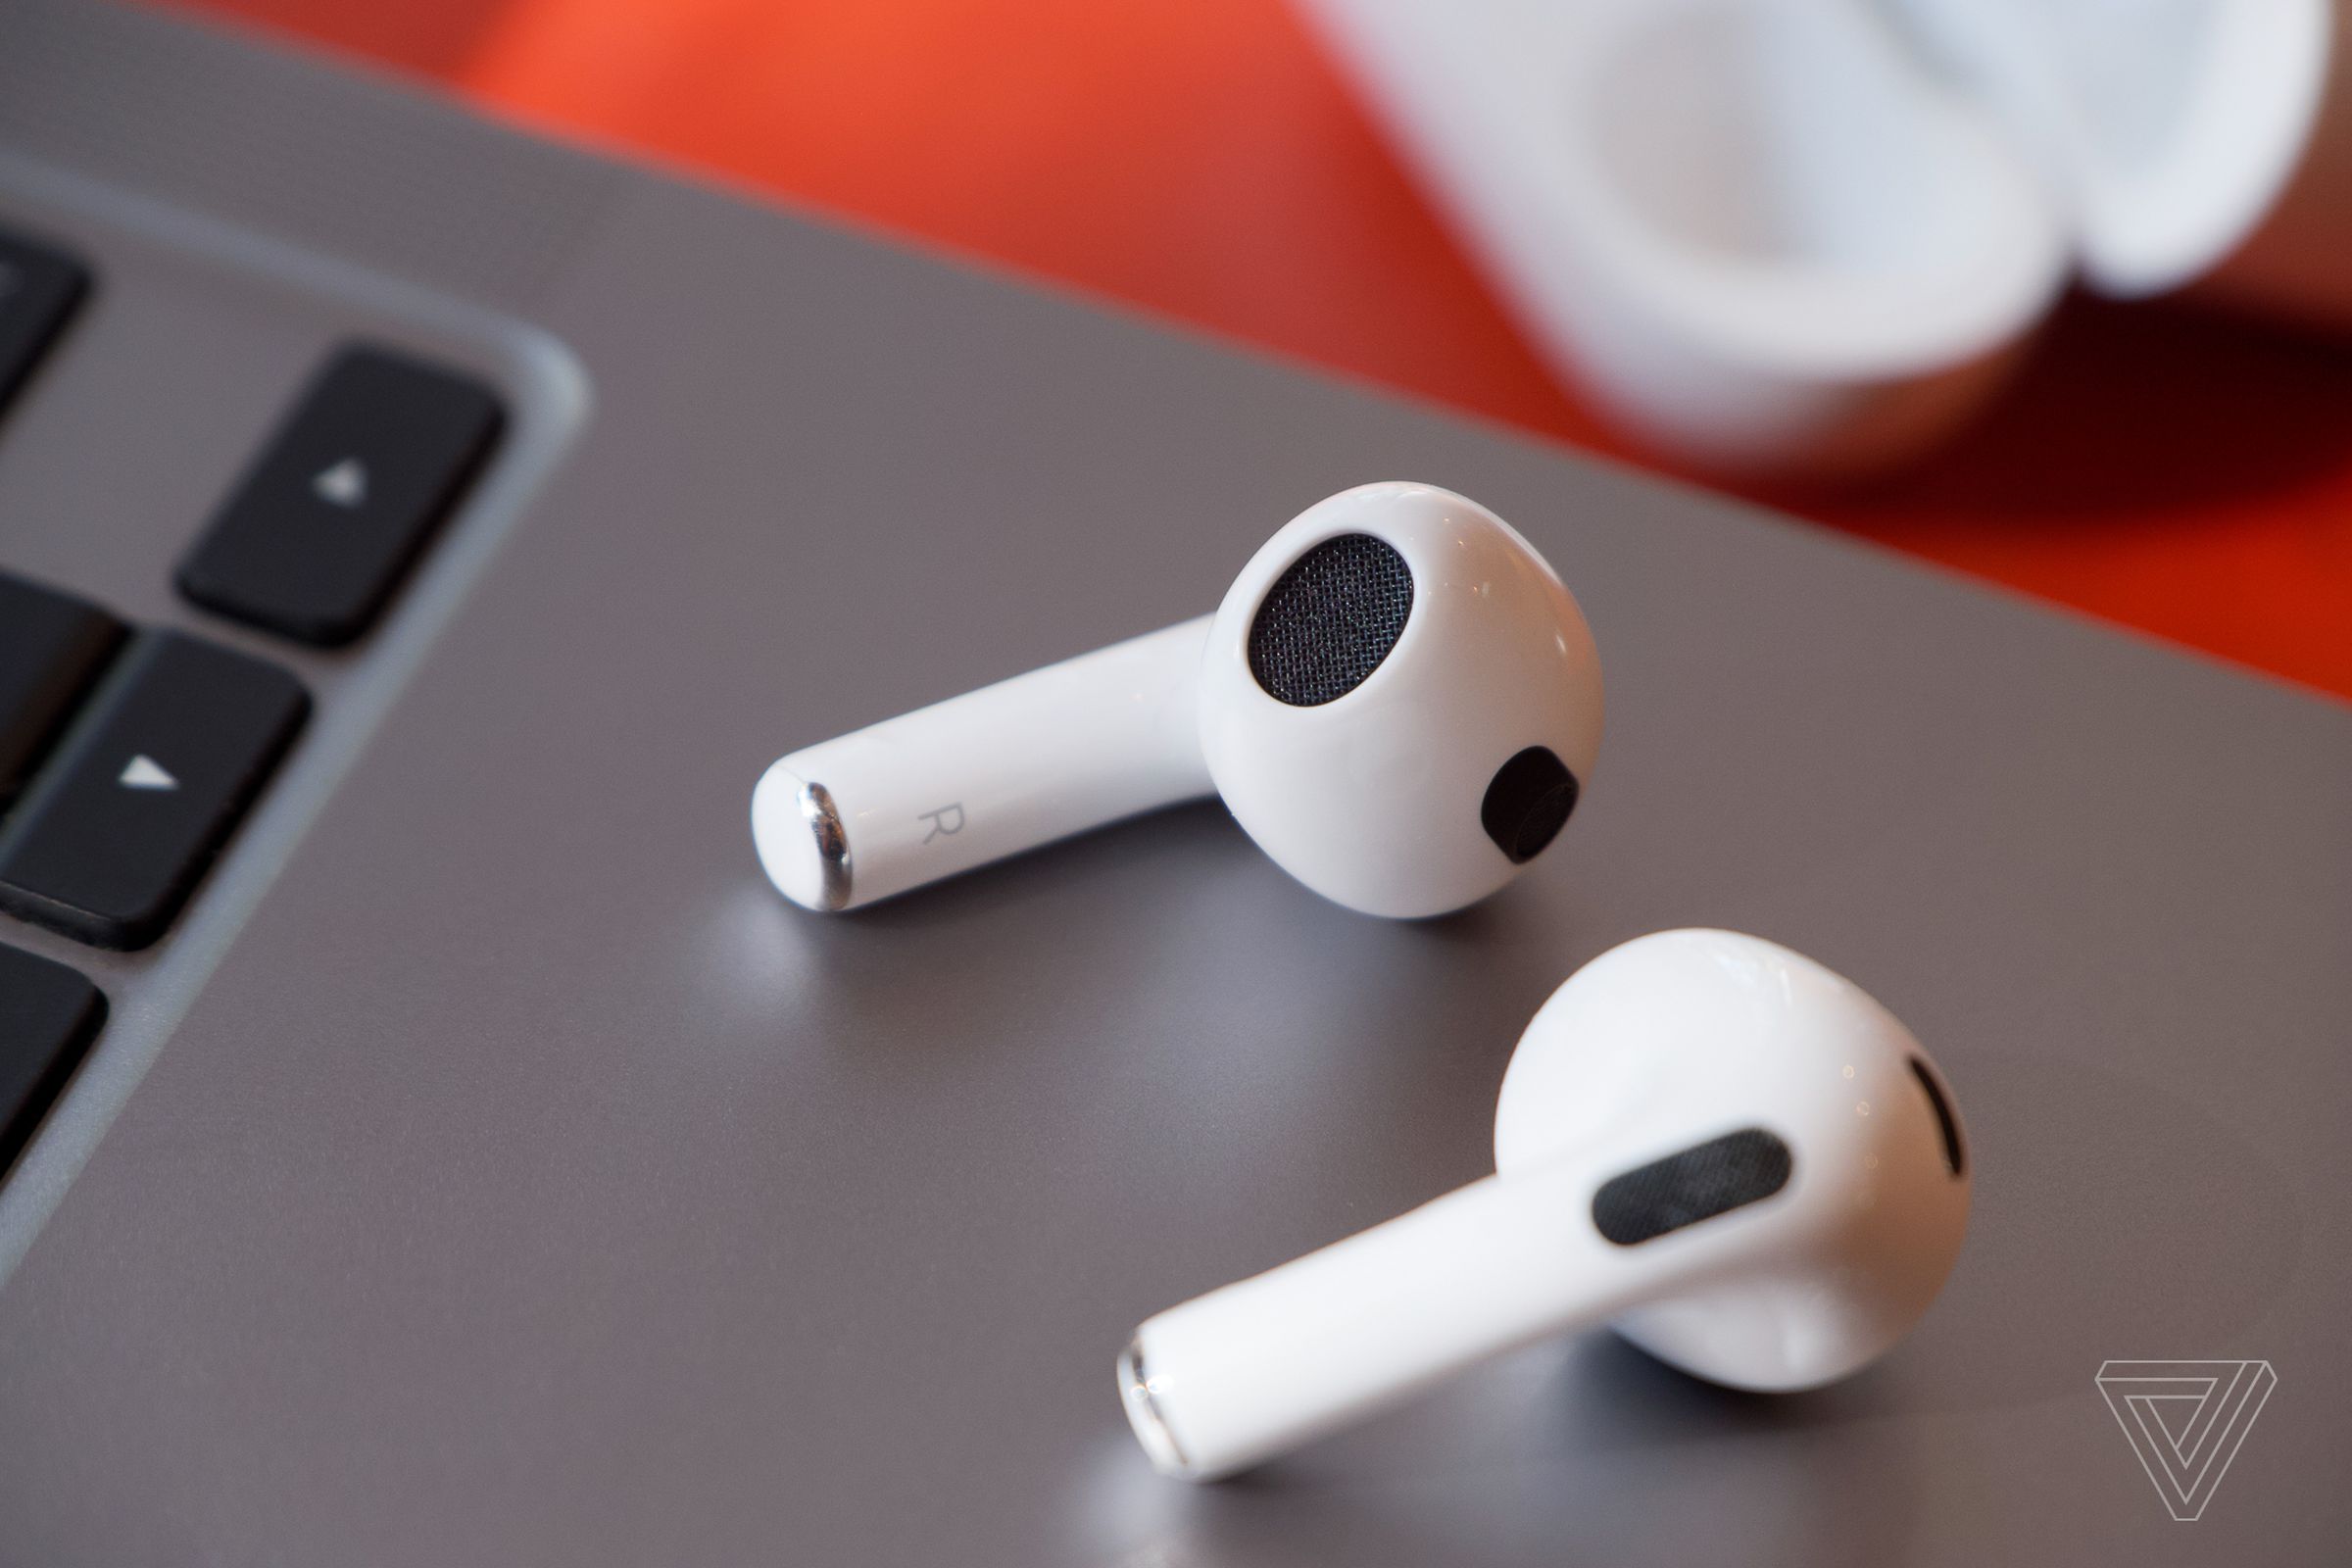 Apple’s AirPods 3 are the best earbuds for voice calls and sound much better than their predecessors.